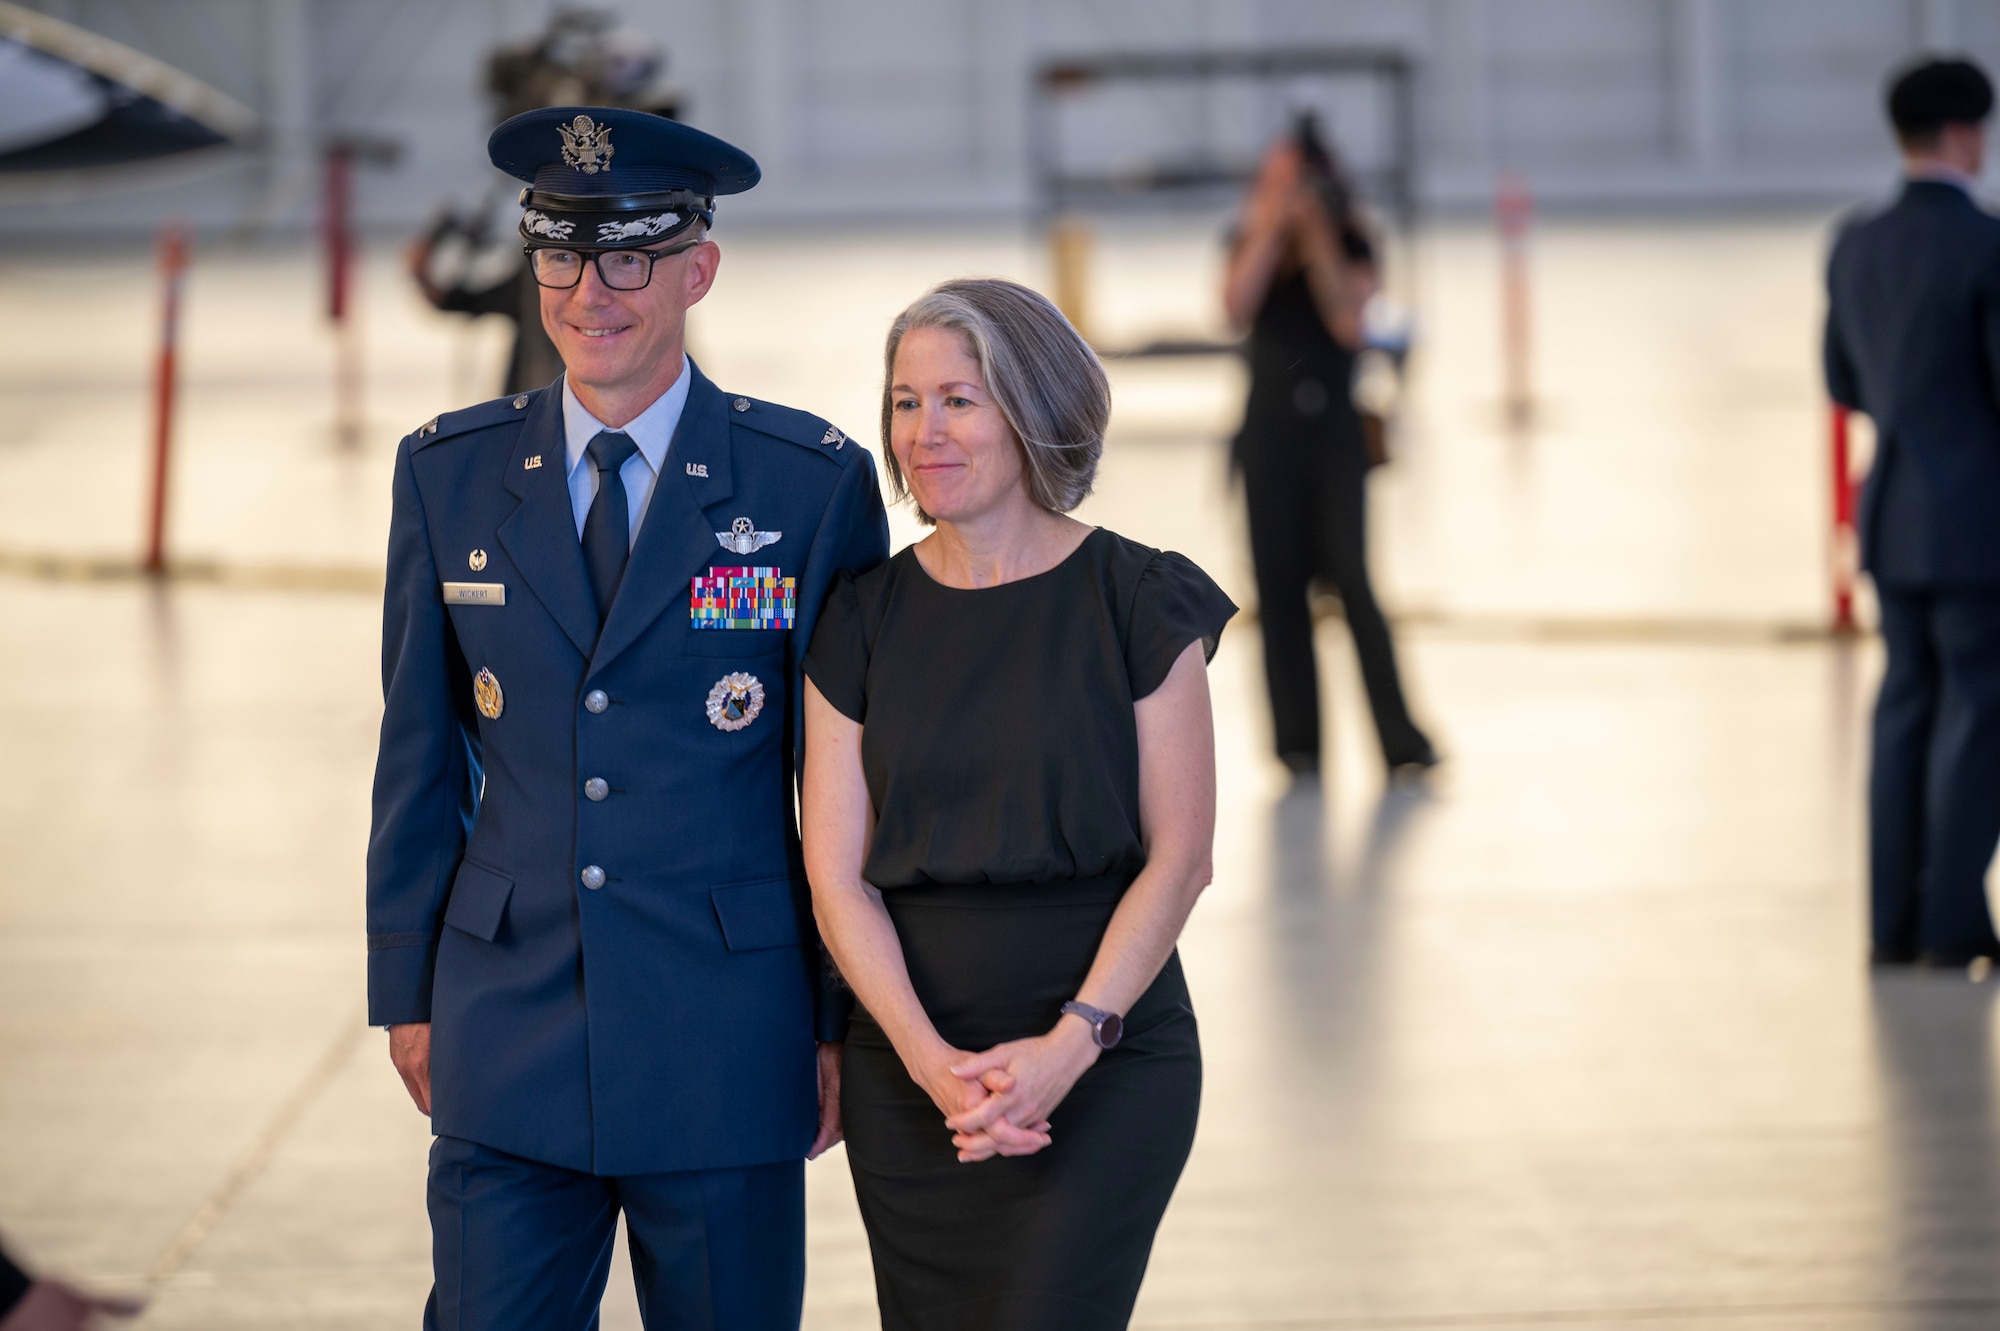 The 412th Test Wing’s new commander, Col. Douglas Wickert and his wife Jody Wickert, prepare to greet Team Edwards after the Wing’s Change of Command Ceremony at Edwards Air Force Base, California, Aug. 18.